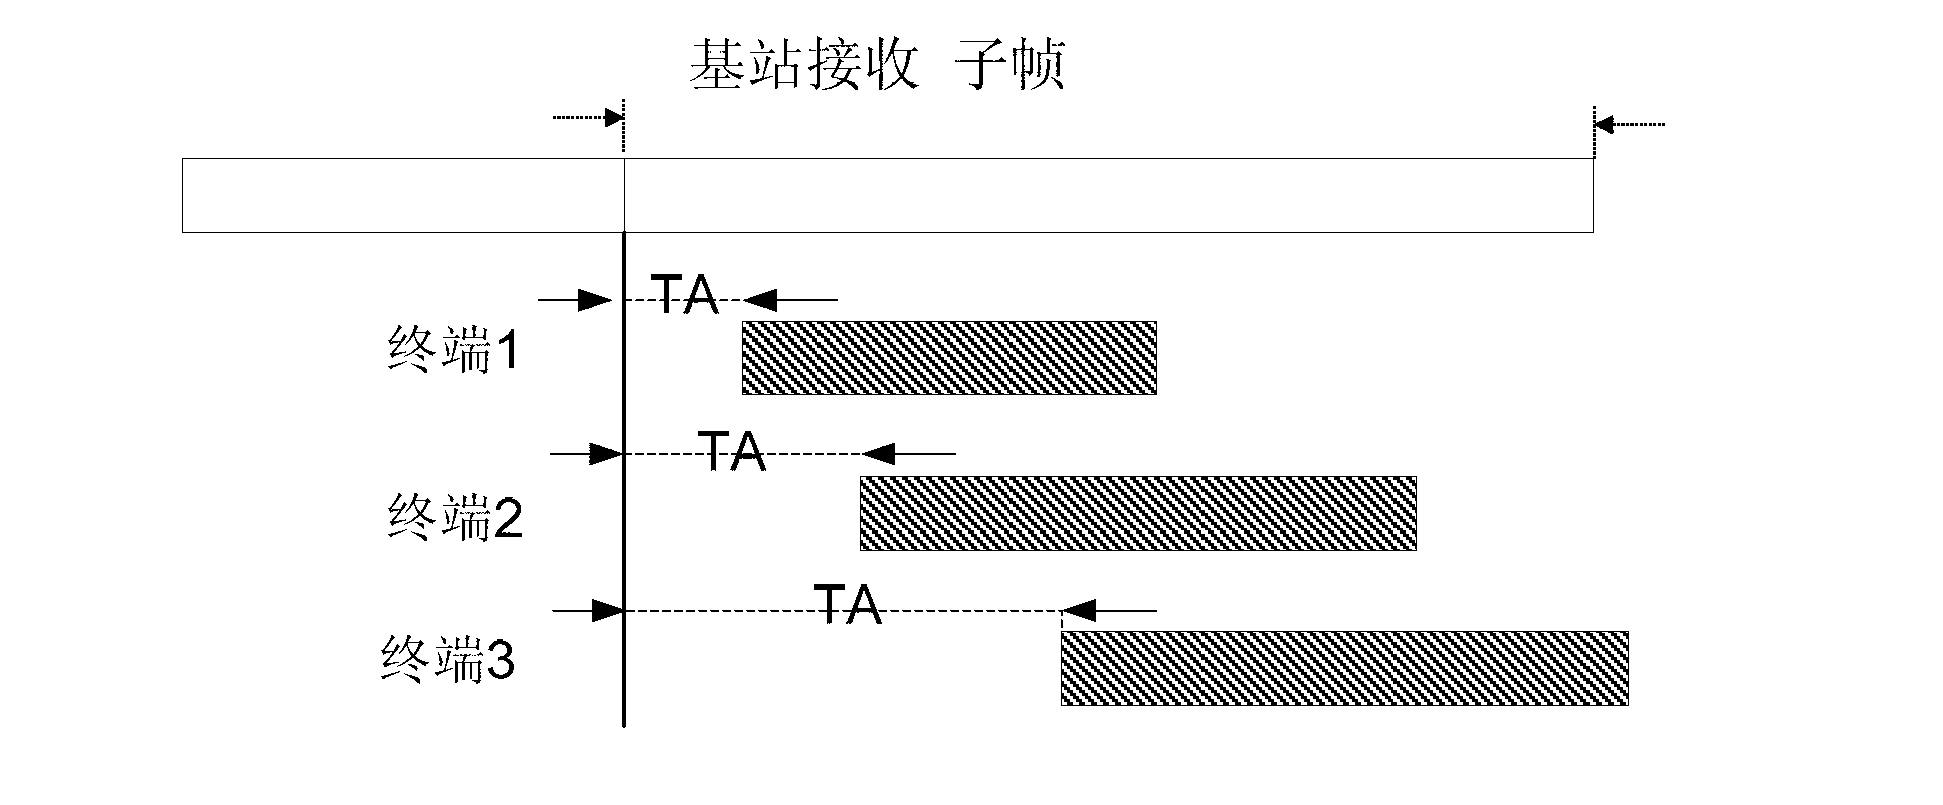 Method and device for automatically retransmitting in LTE (Long Term Evolution)